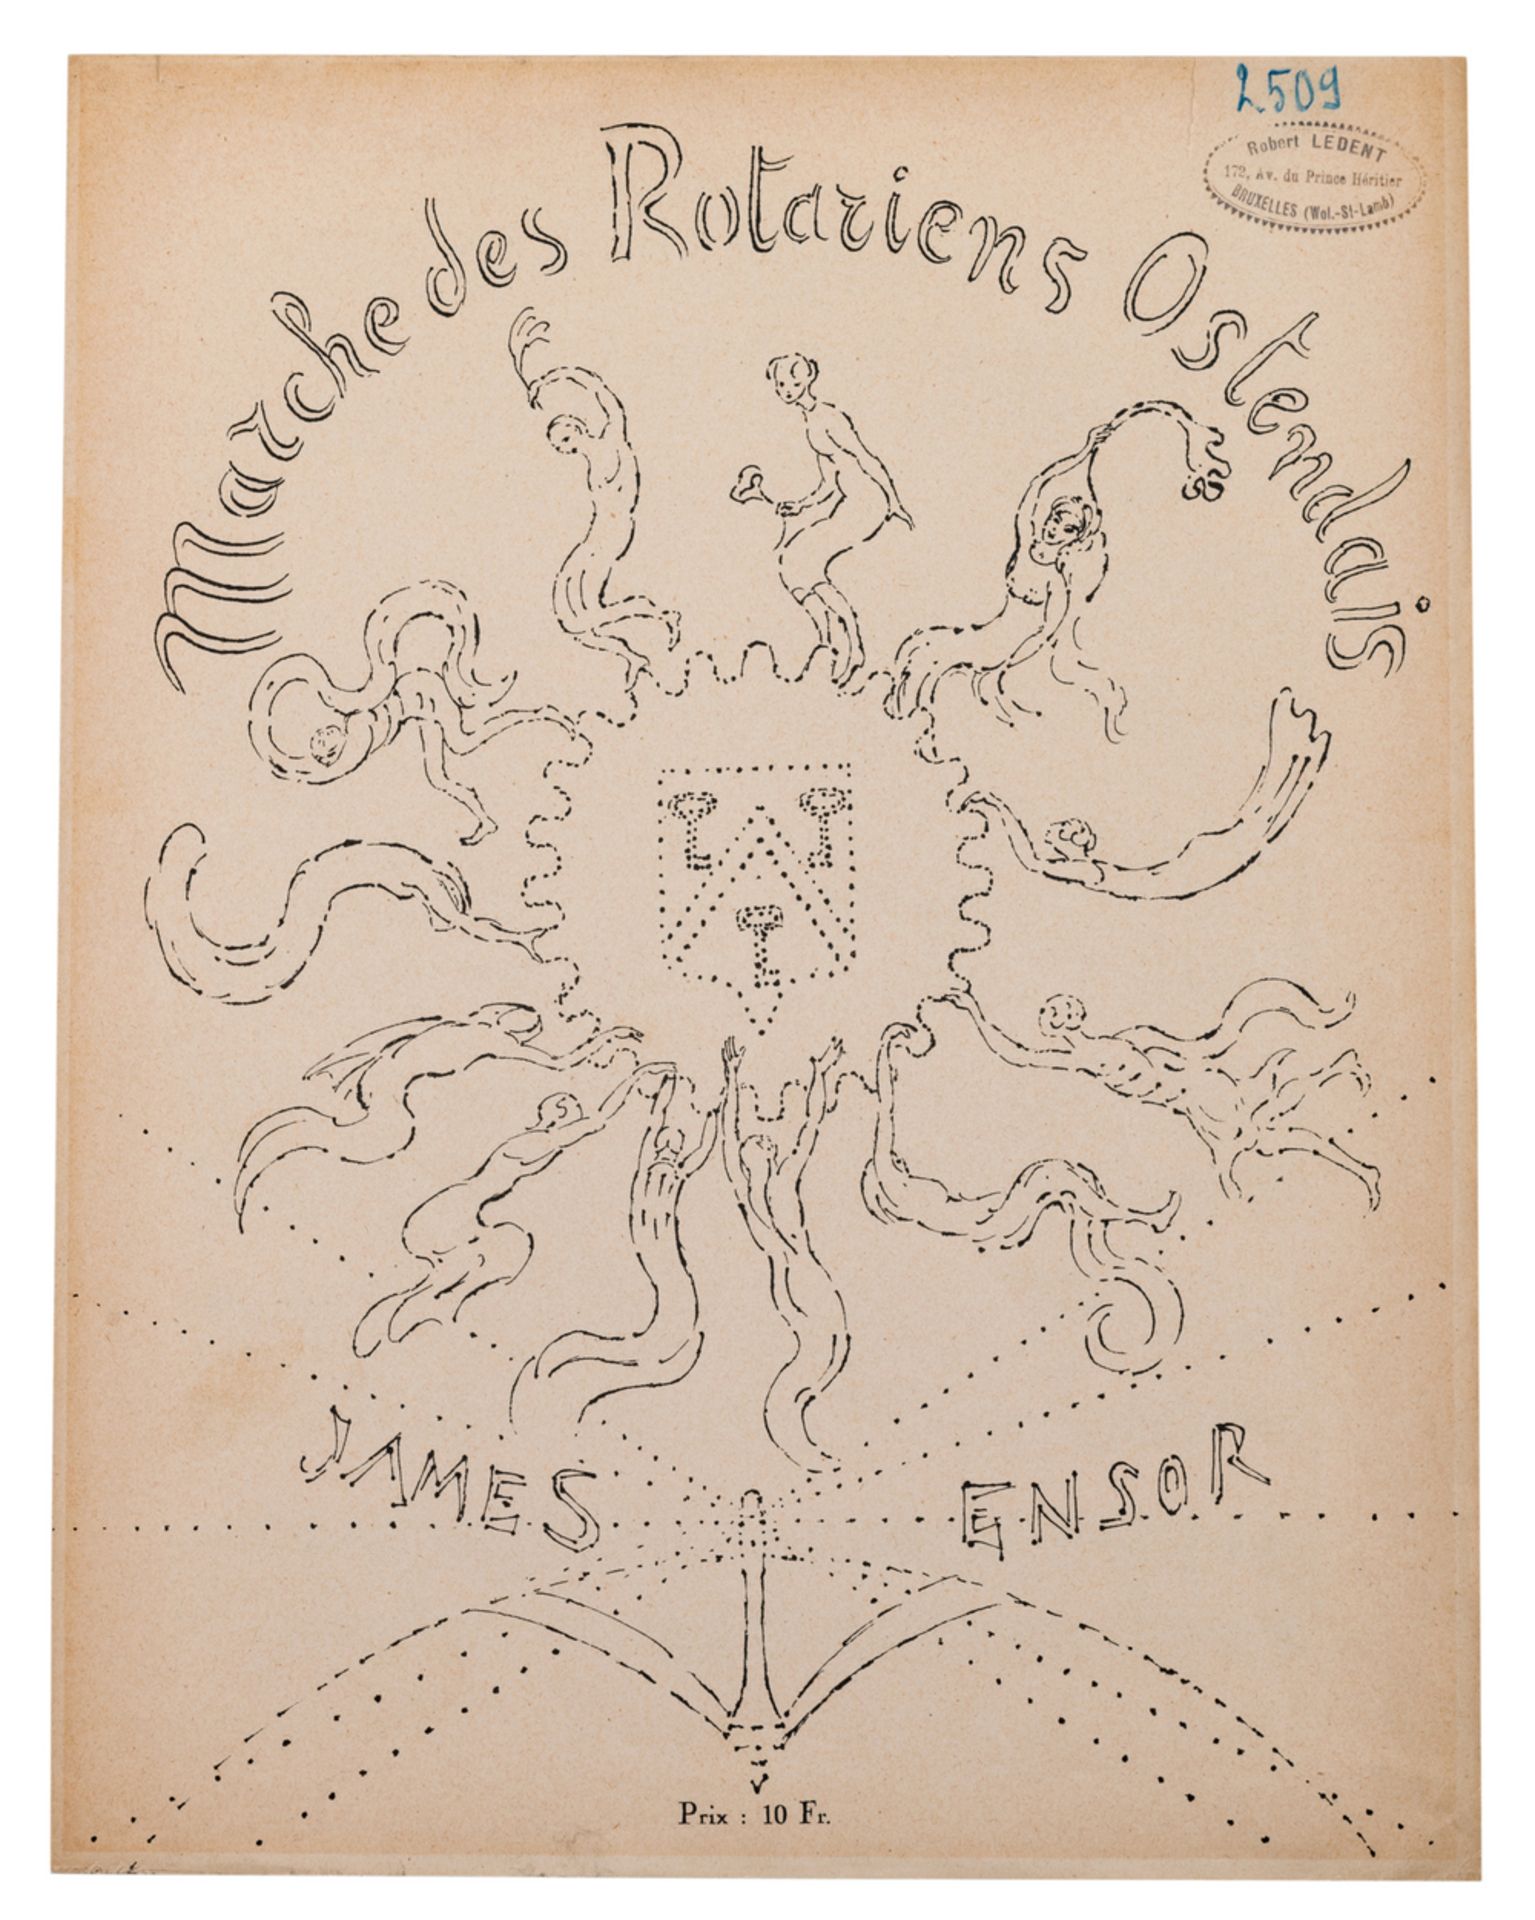 Ensor J., the sheet music for the 'Marche des Rotariens Ostendais', lithograph, (with the personal